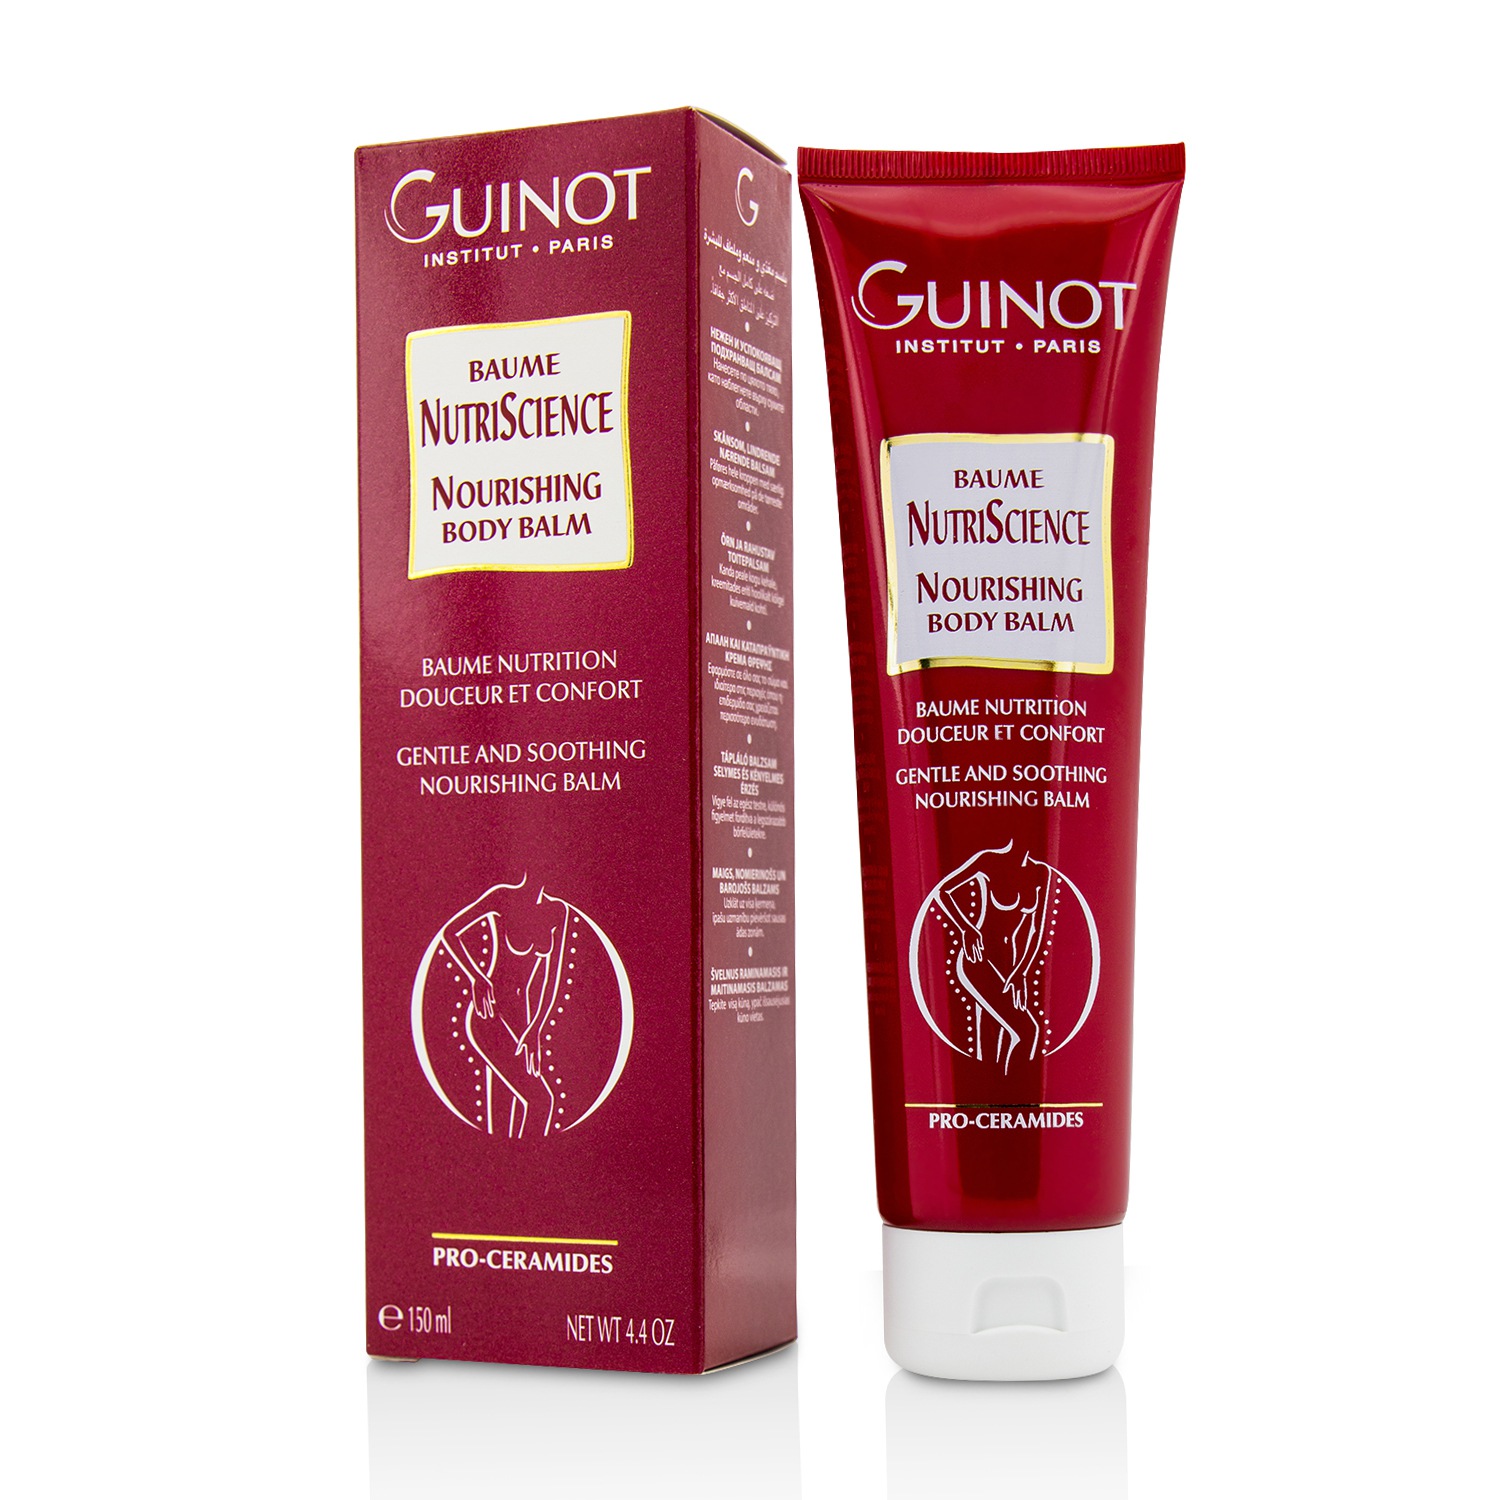 Baume Nutriscience Gentle And Soothing Nourishing Balm Guinot Image